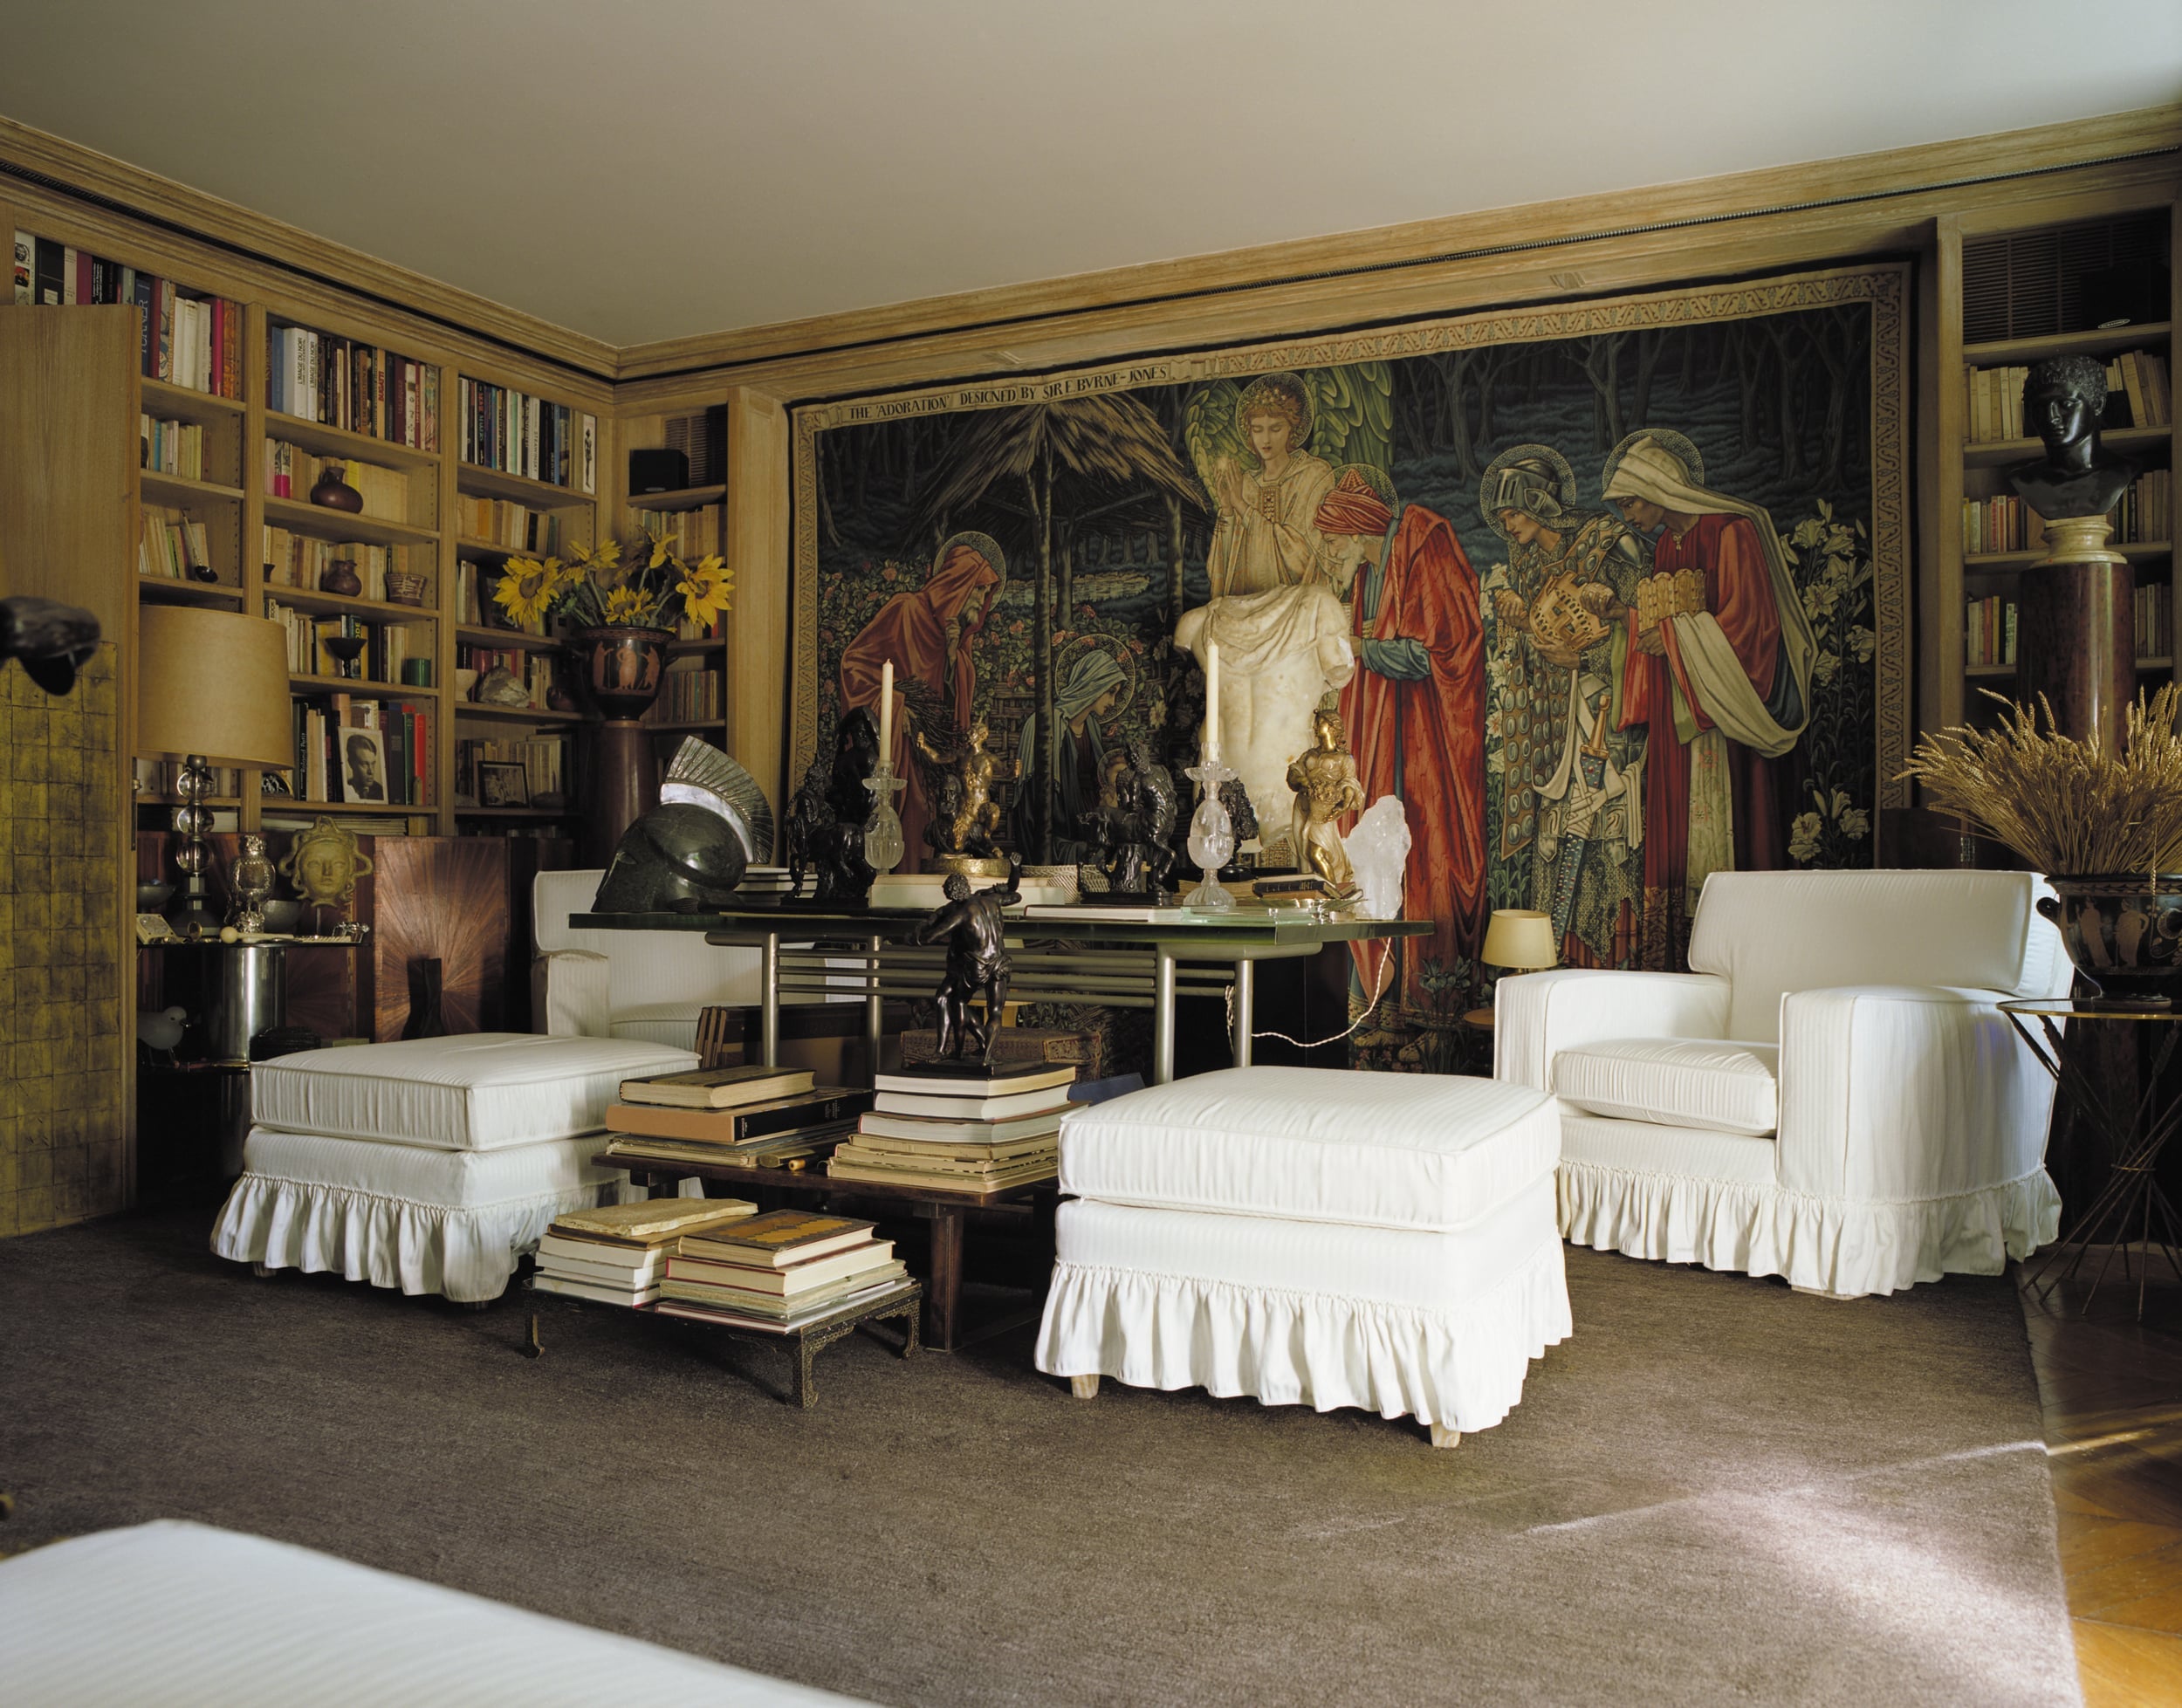 Quiet Luxury May Be Trending, but These Famous Interiors Prove That Quality and Quirk Endure